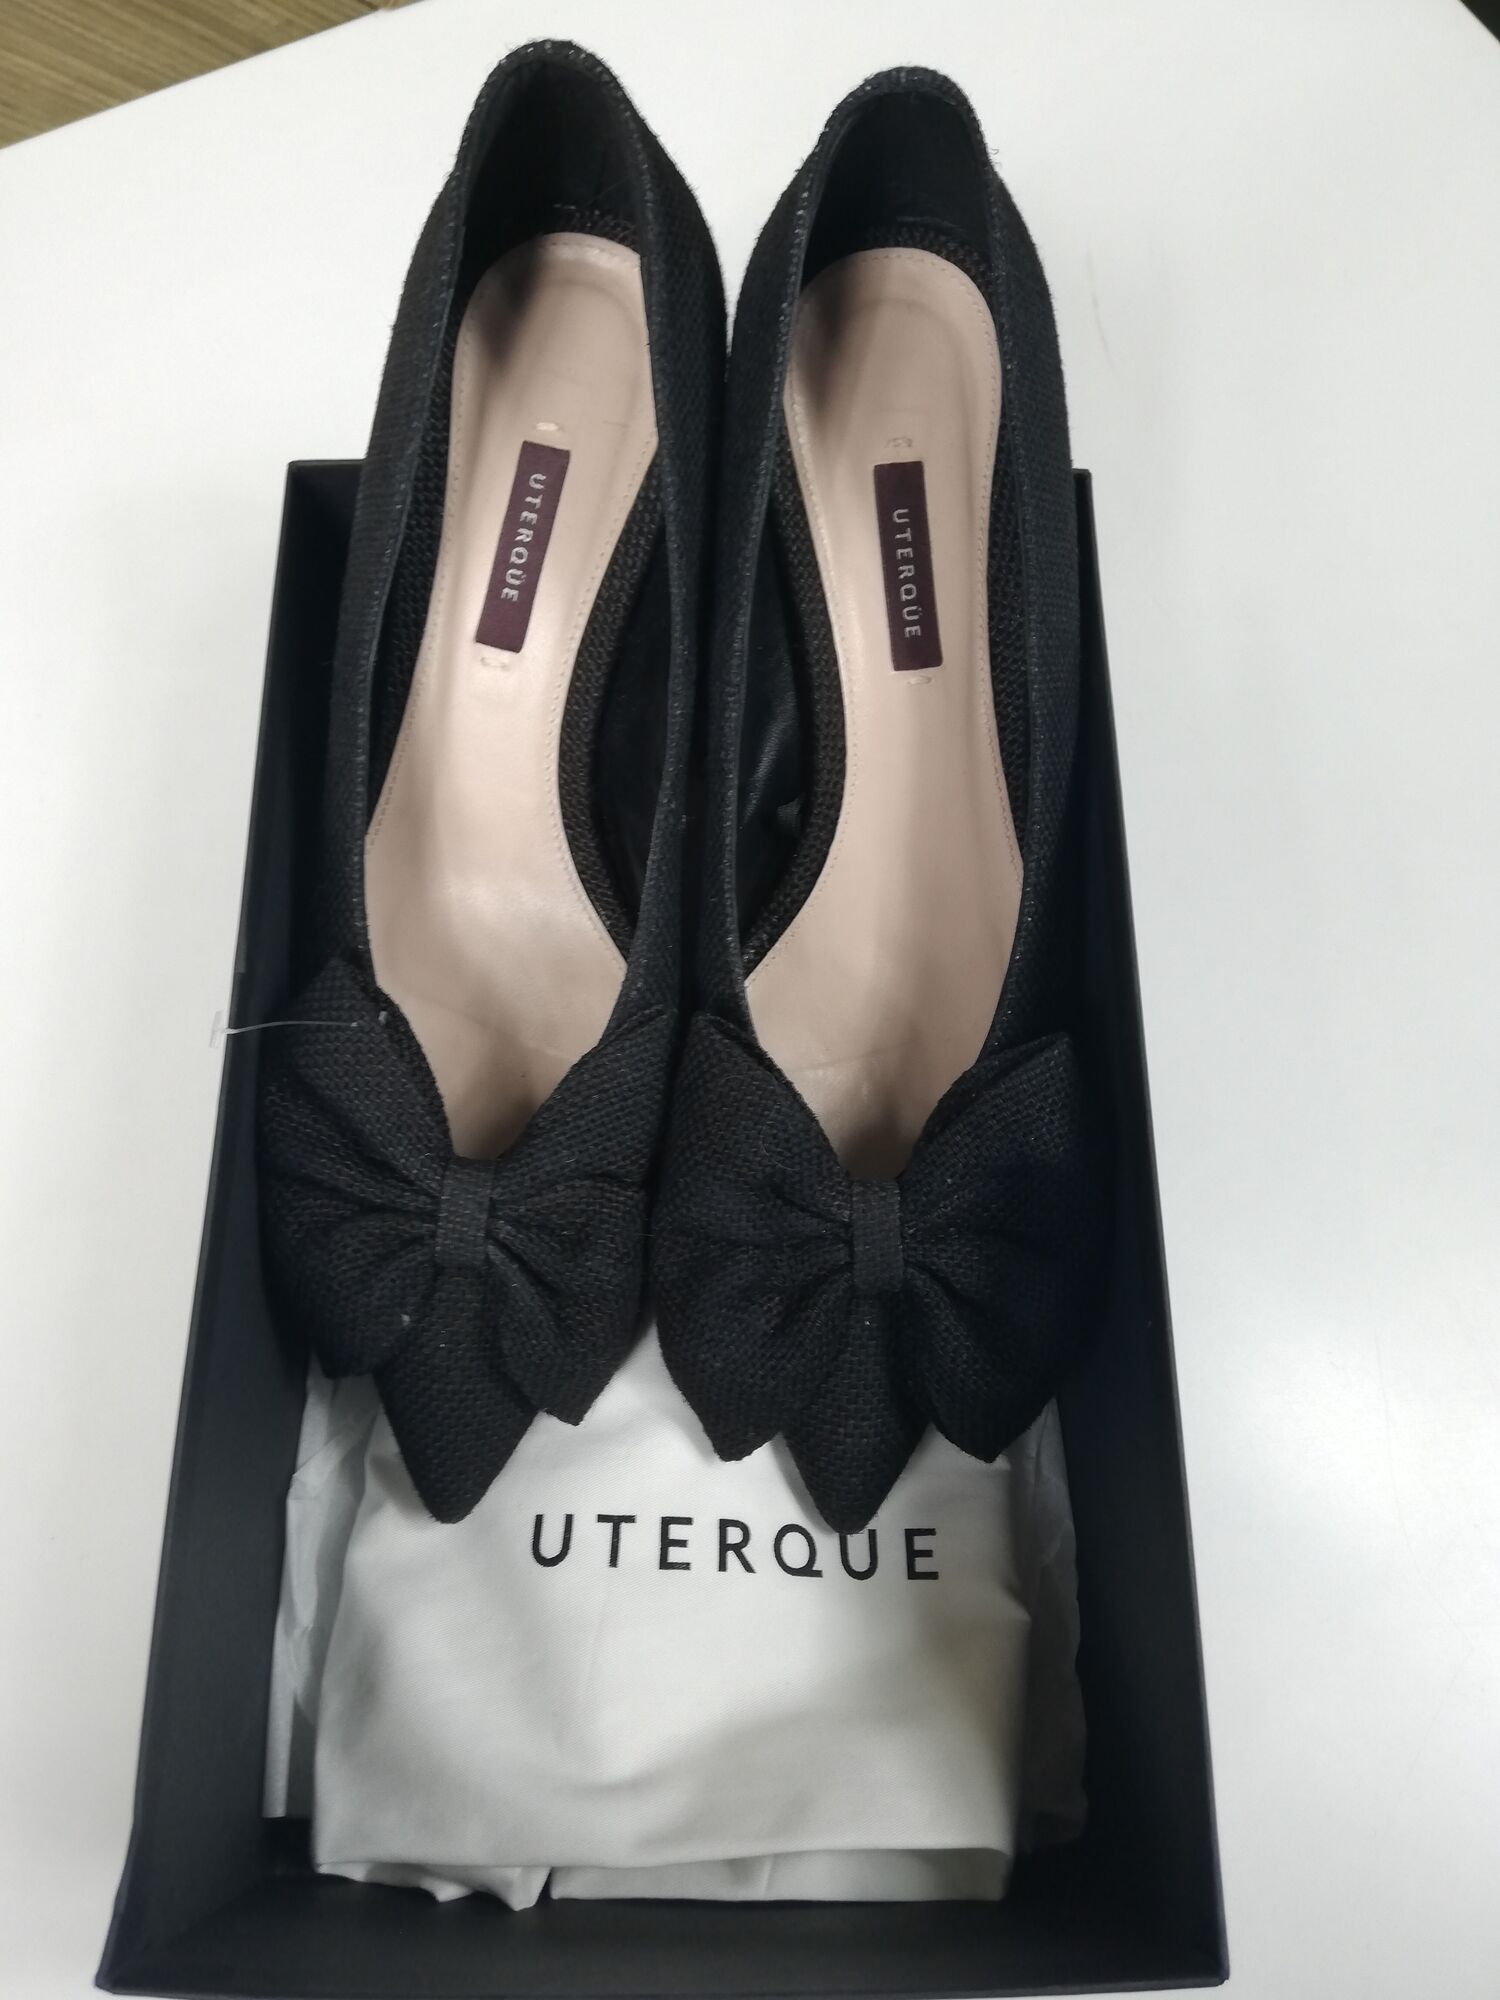 uterque brown shoes - Google Search | ShopLook